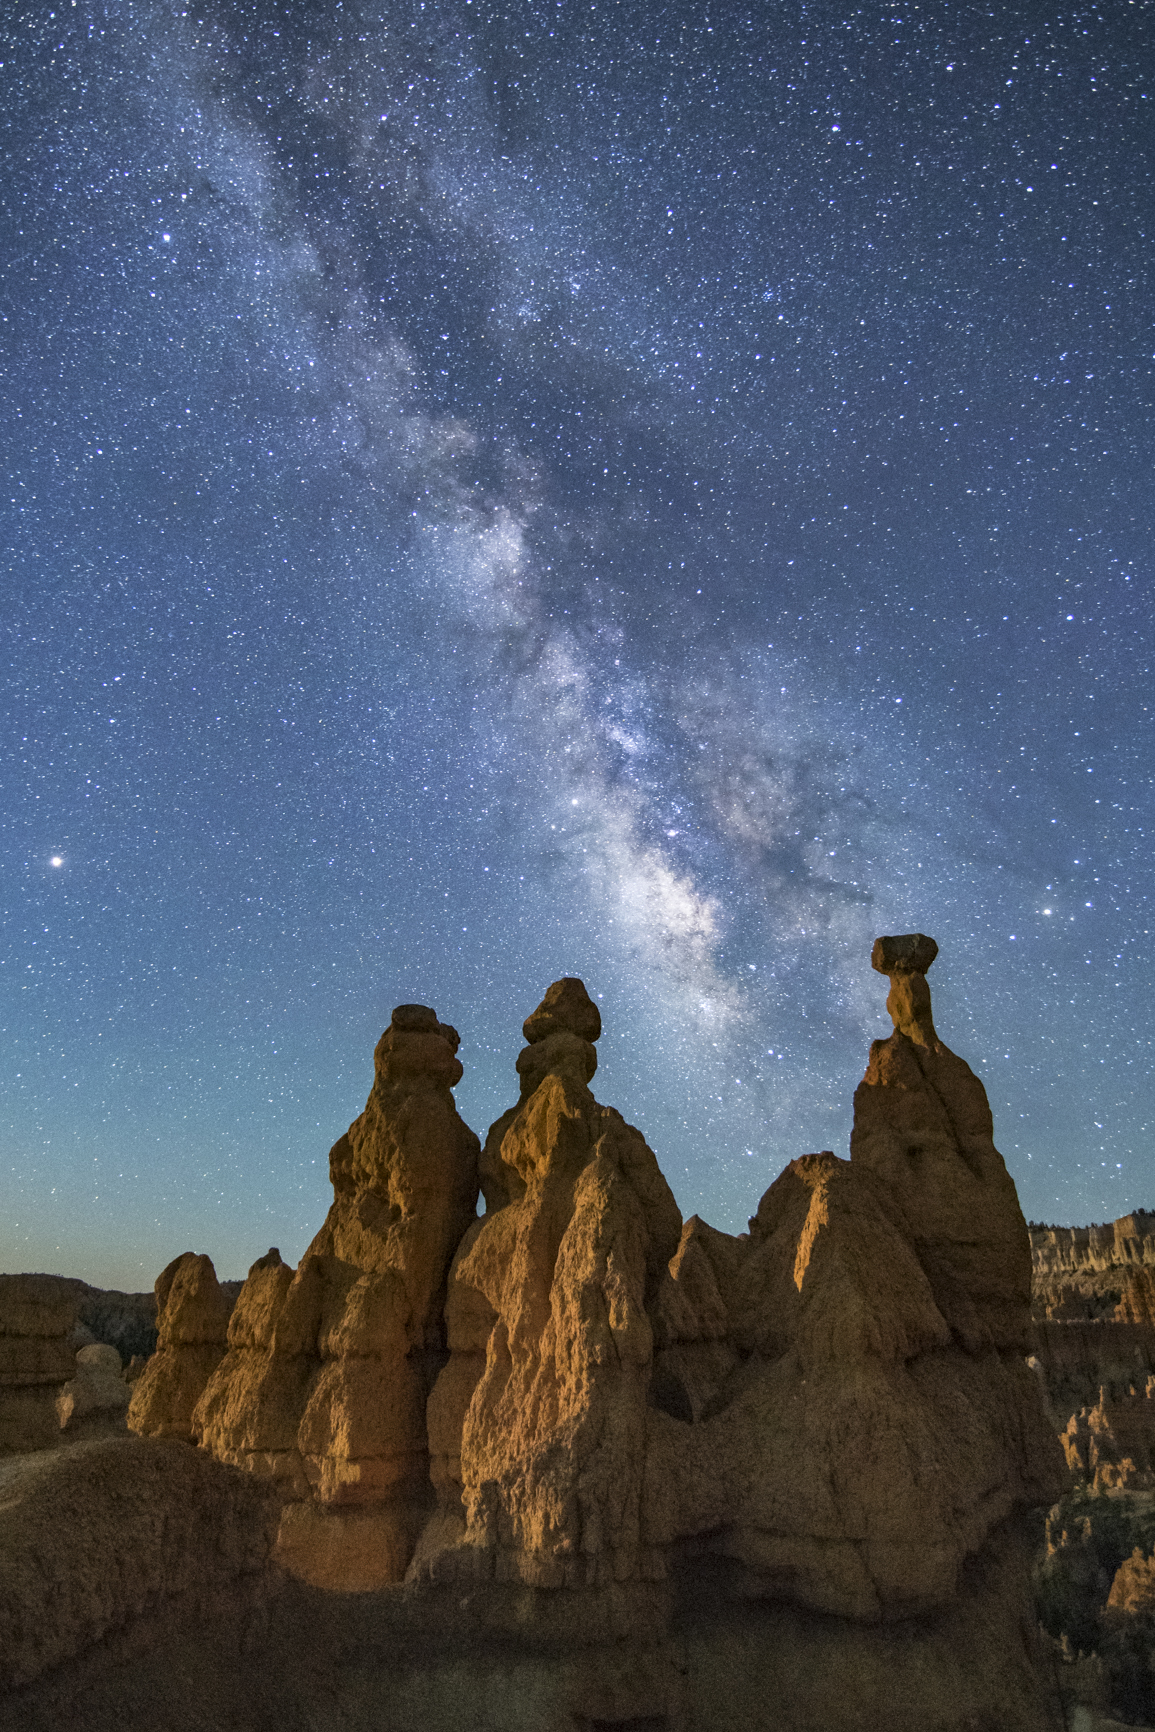 Hoodoo Formations with Moonlight and Milky Way in Bryce